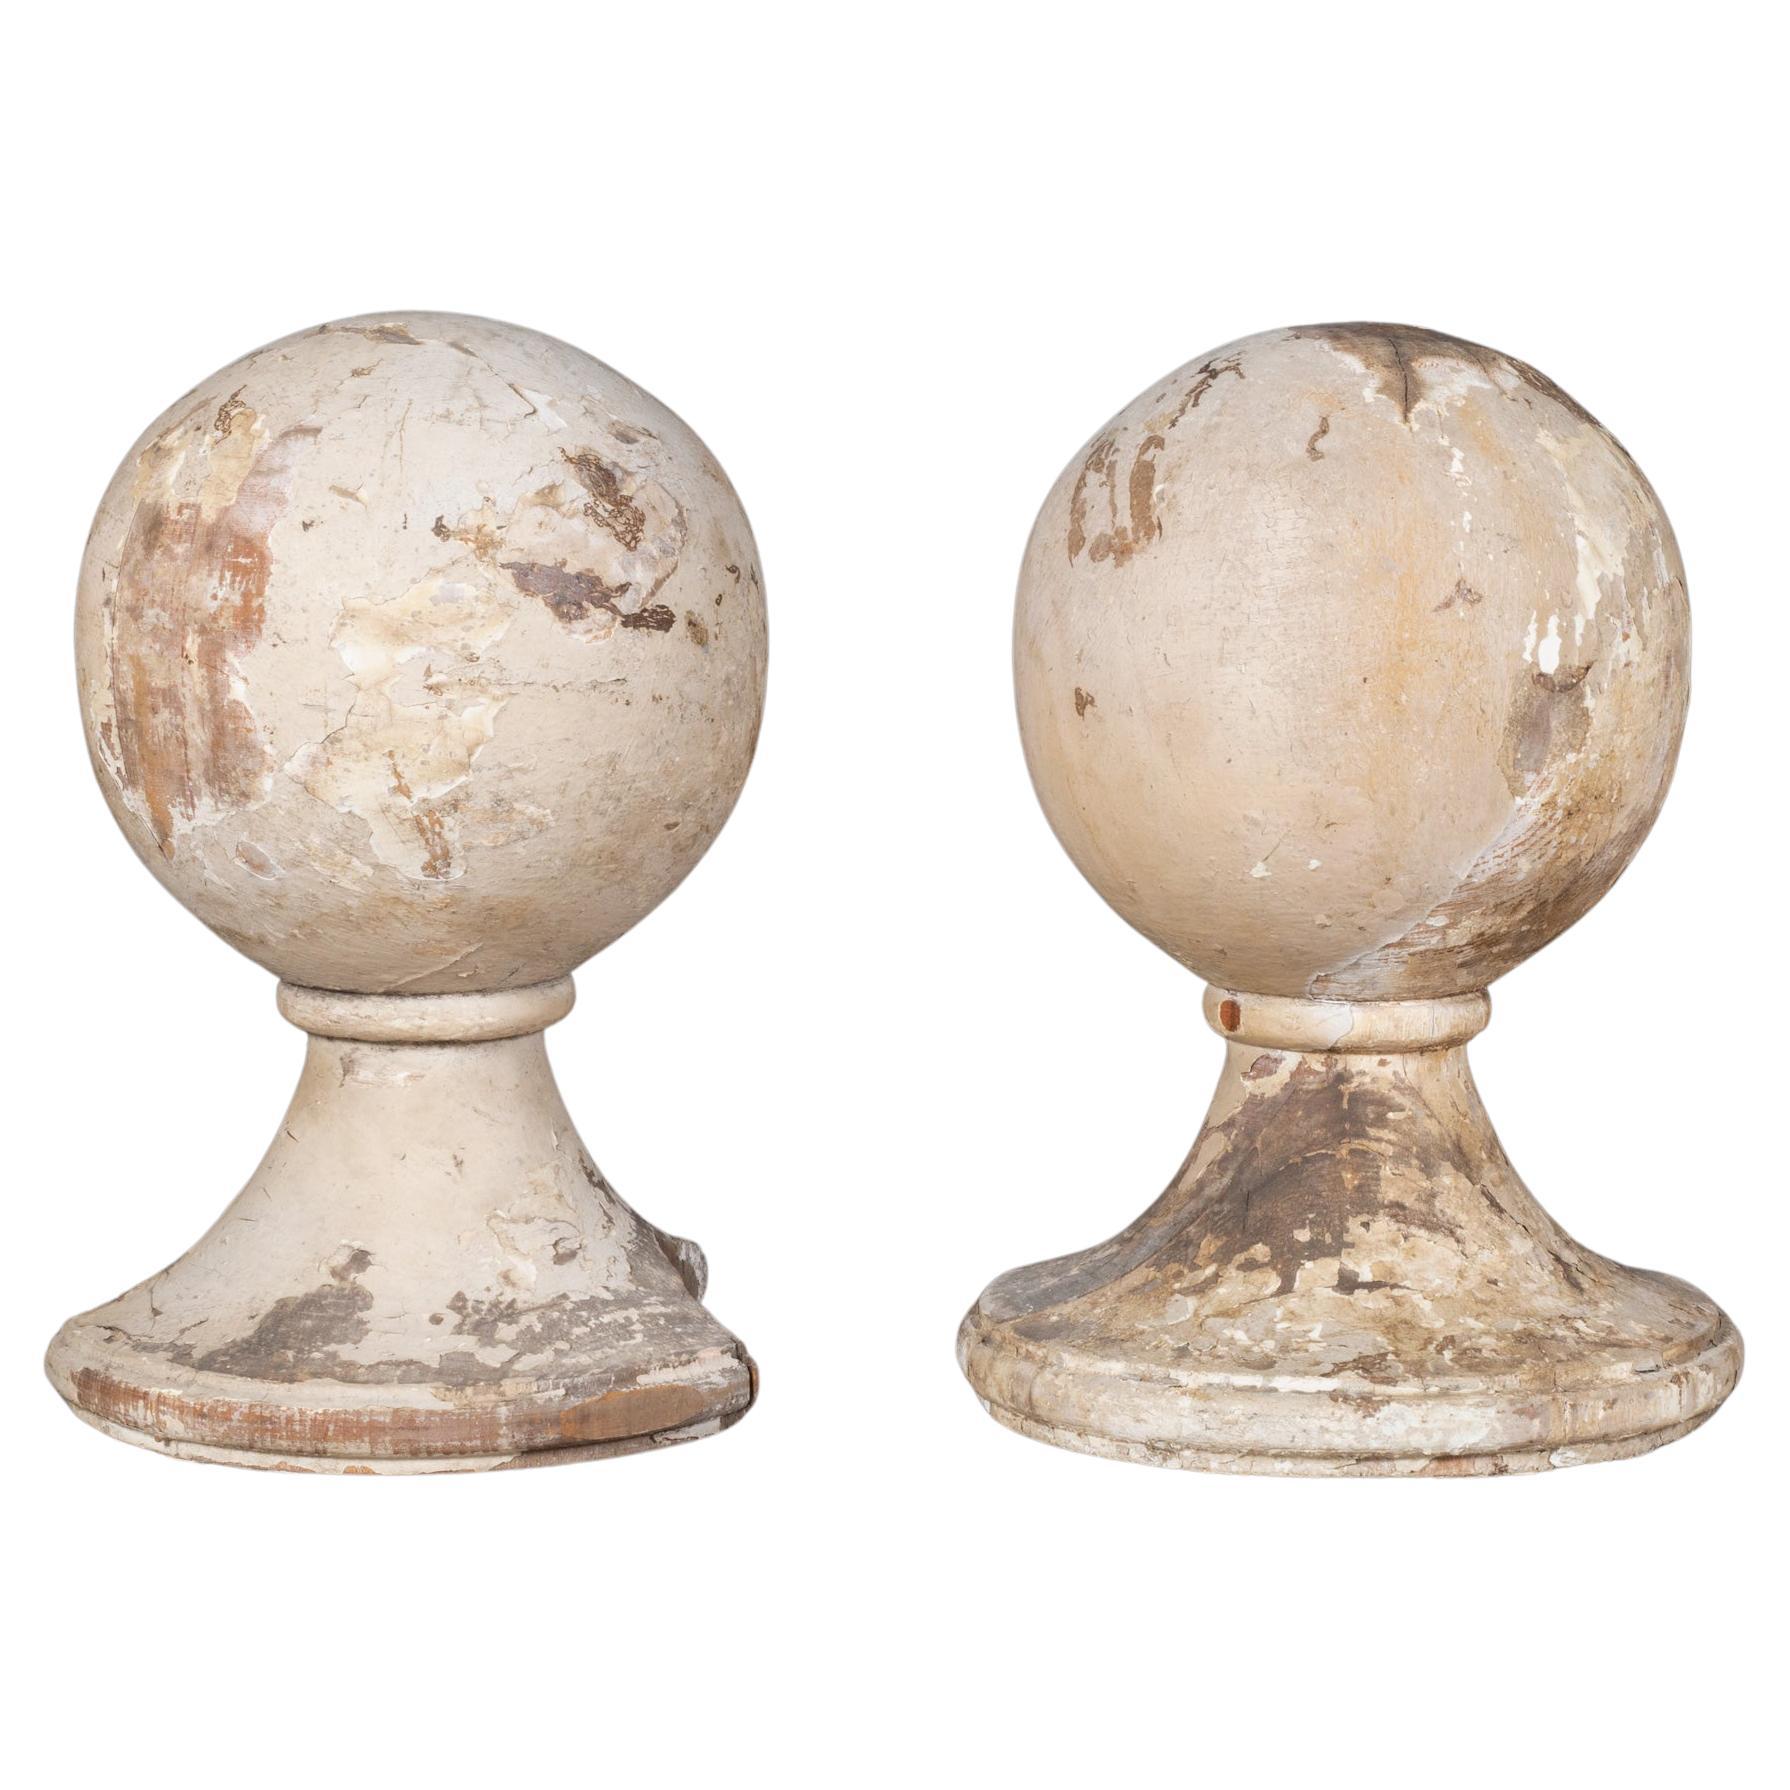 Large Distressed Wooden Ball Finials c.1880-1920 (FREE SHIPPING) 